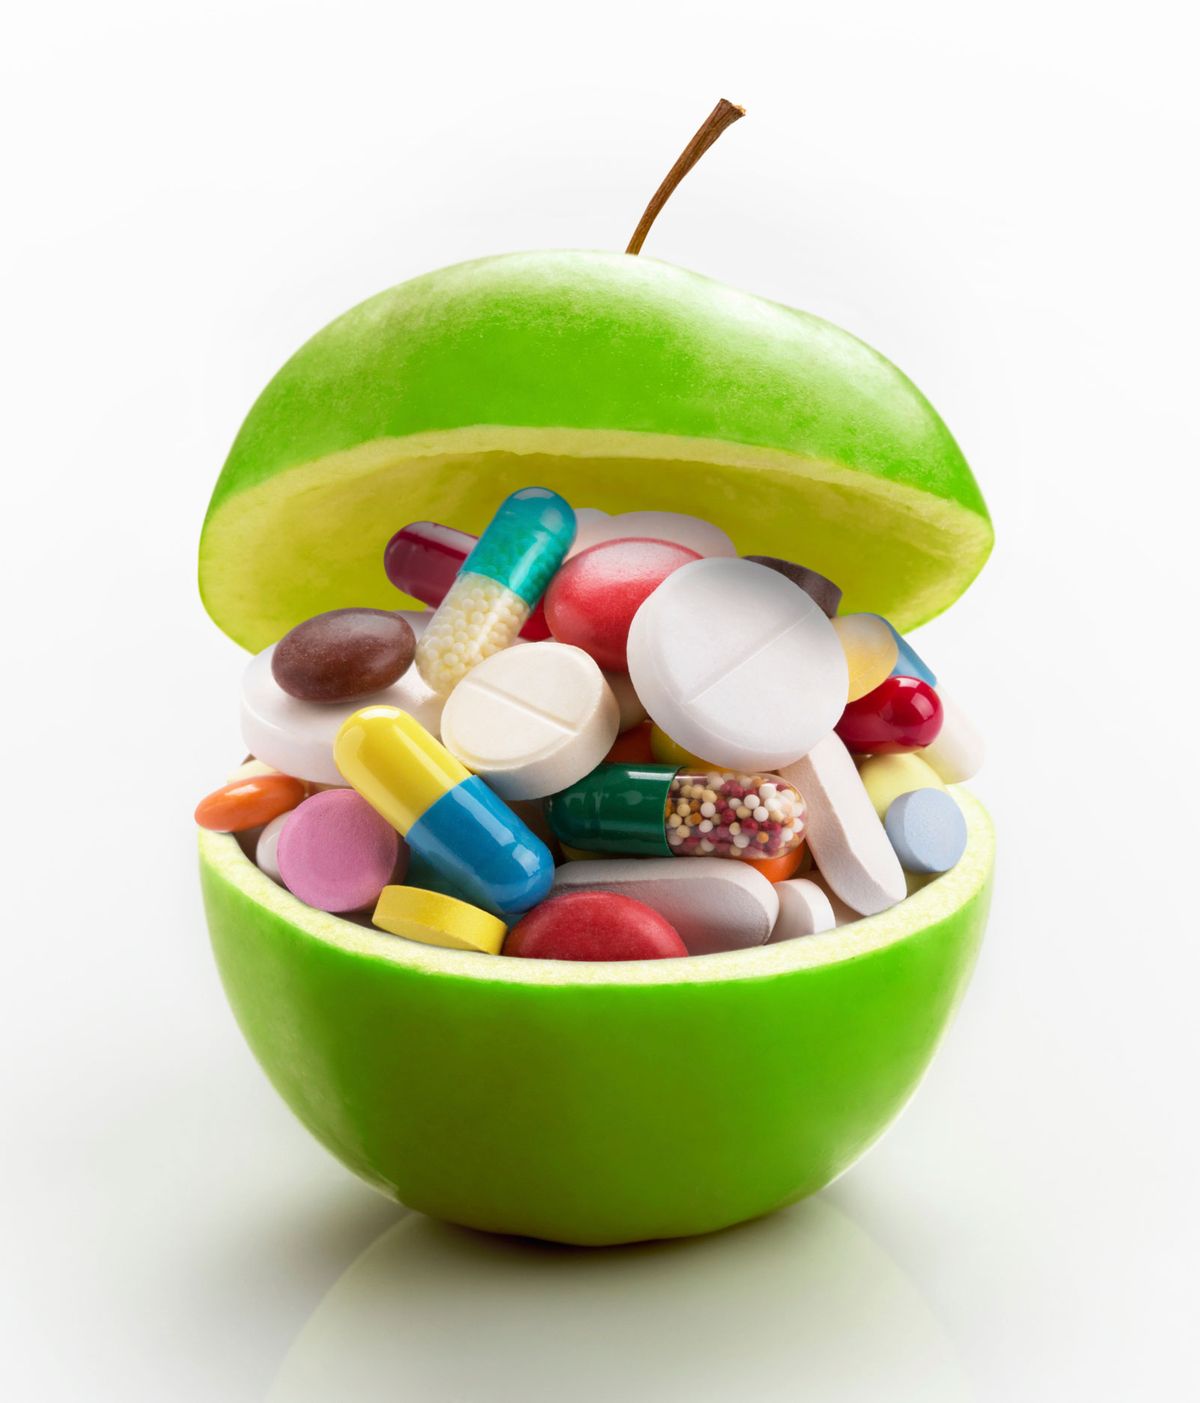 10 Supplements That Do Not Work as Advertised